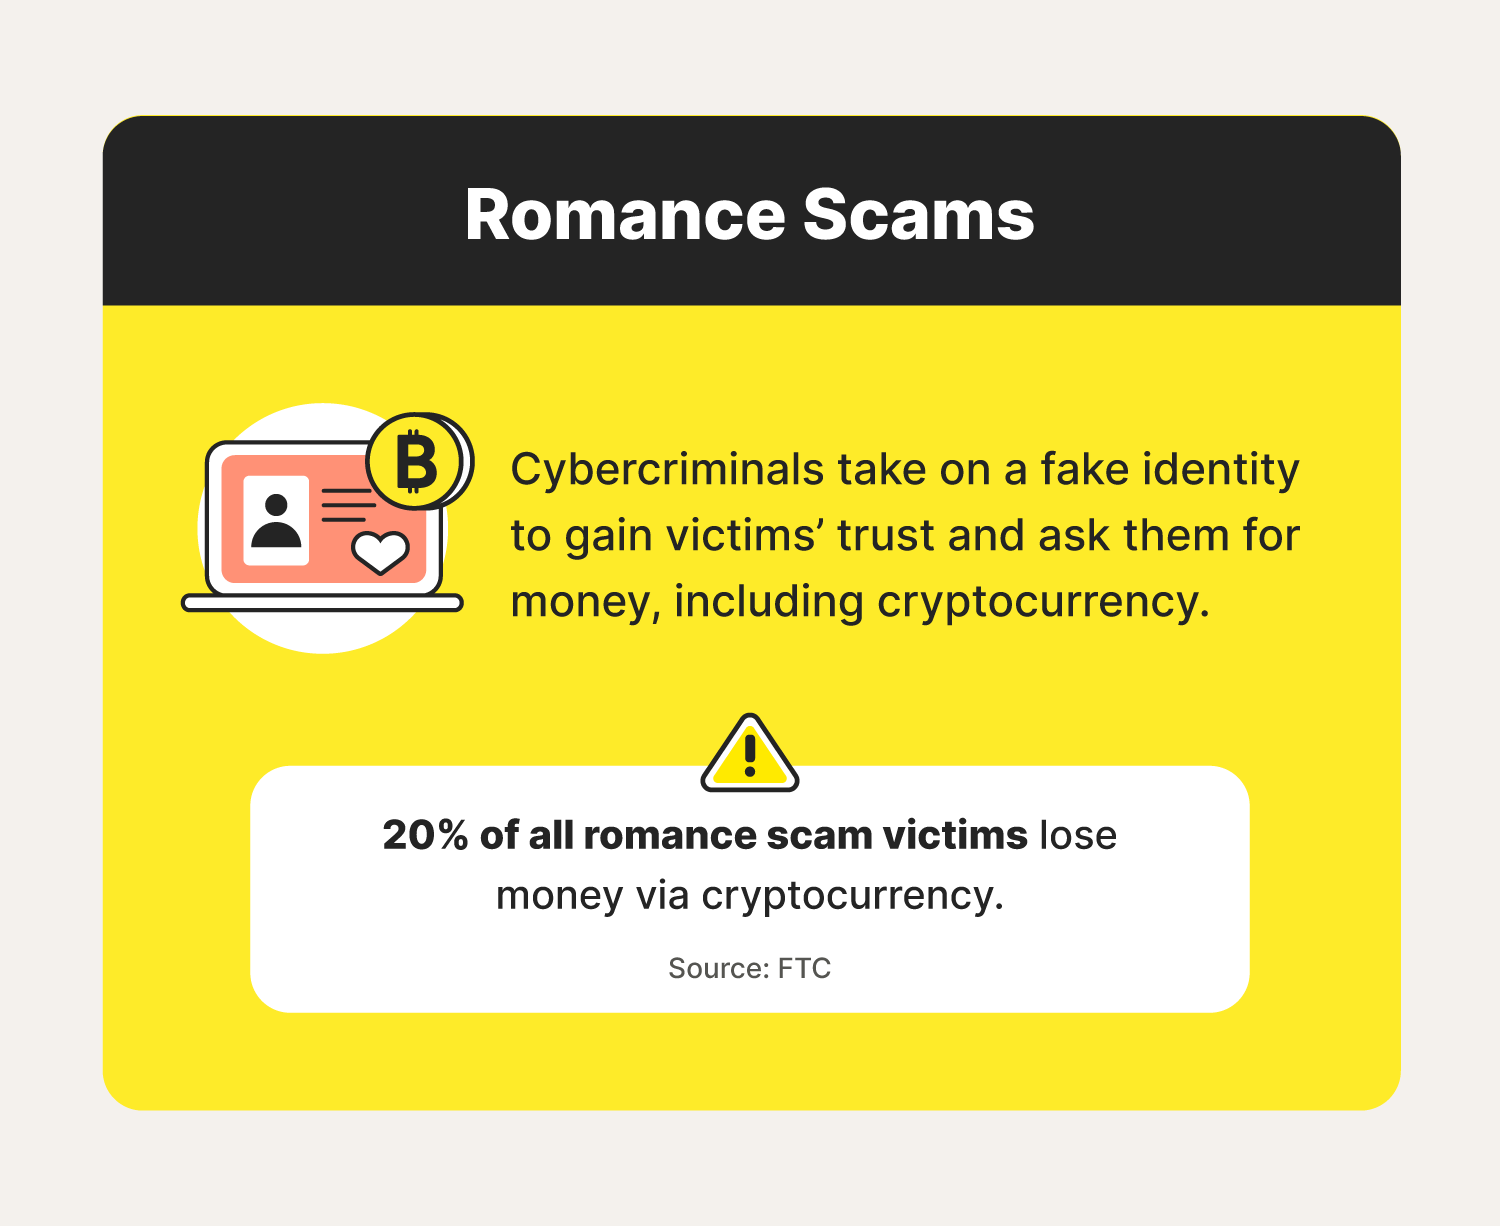 An illustration accompanies a description of romance cryptocurrency scams. 